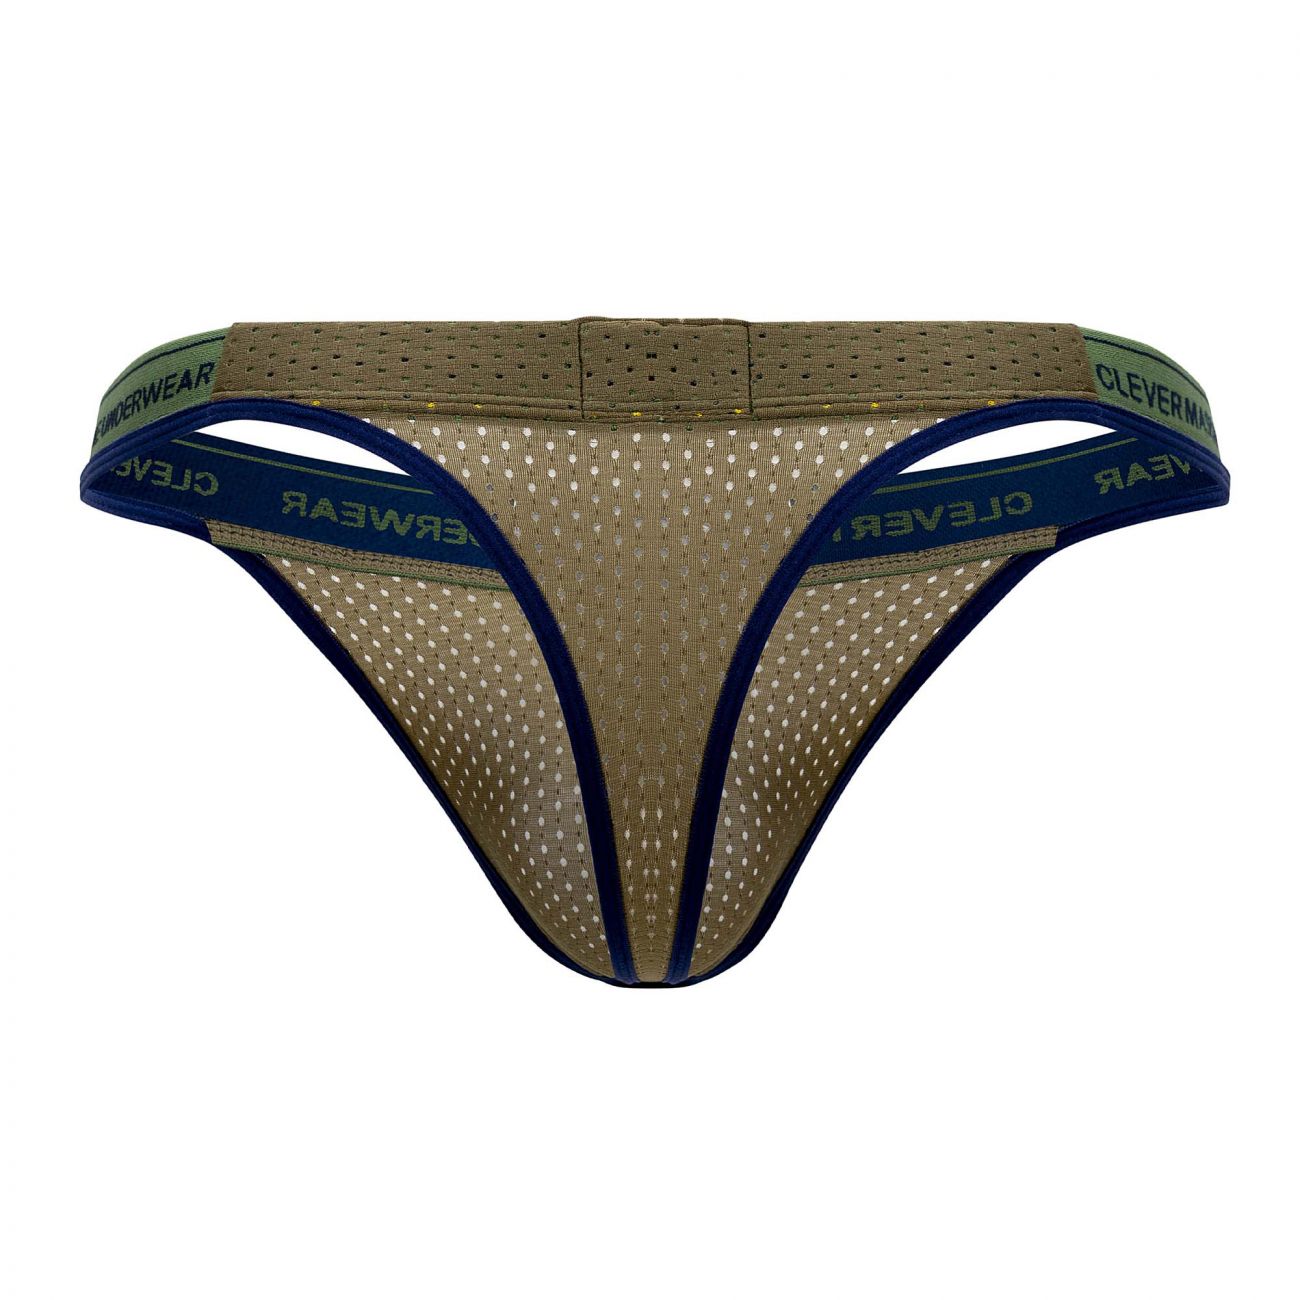 Clever 0927 Premium Thongs Green